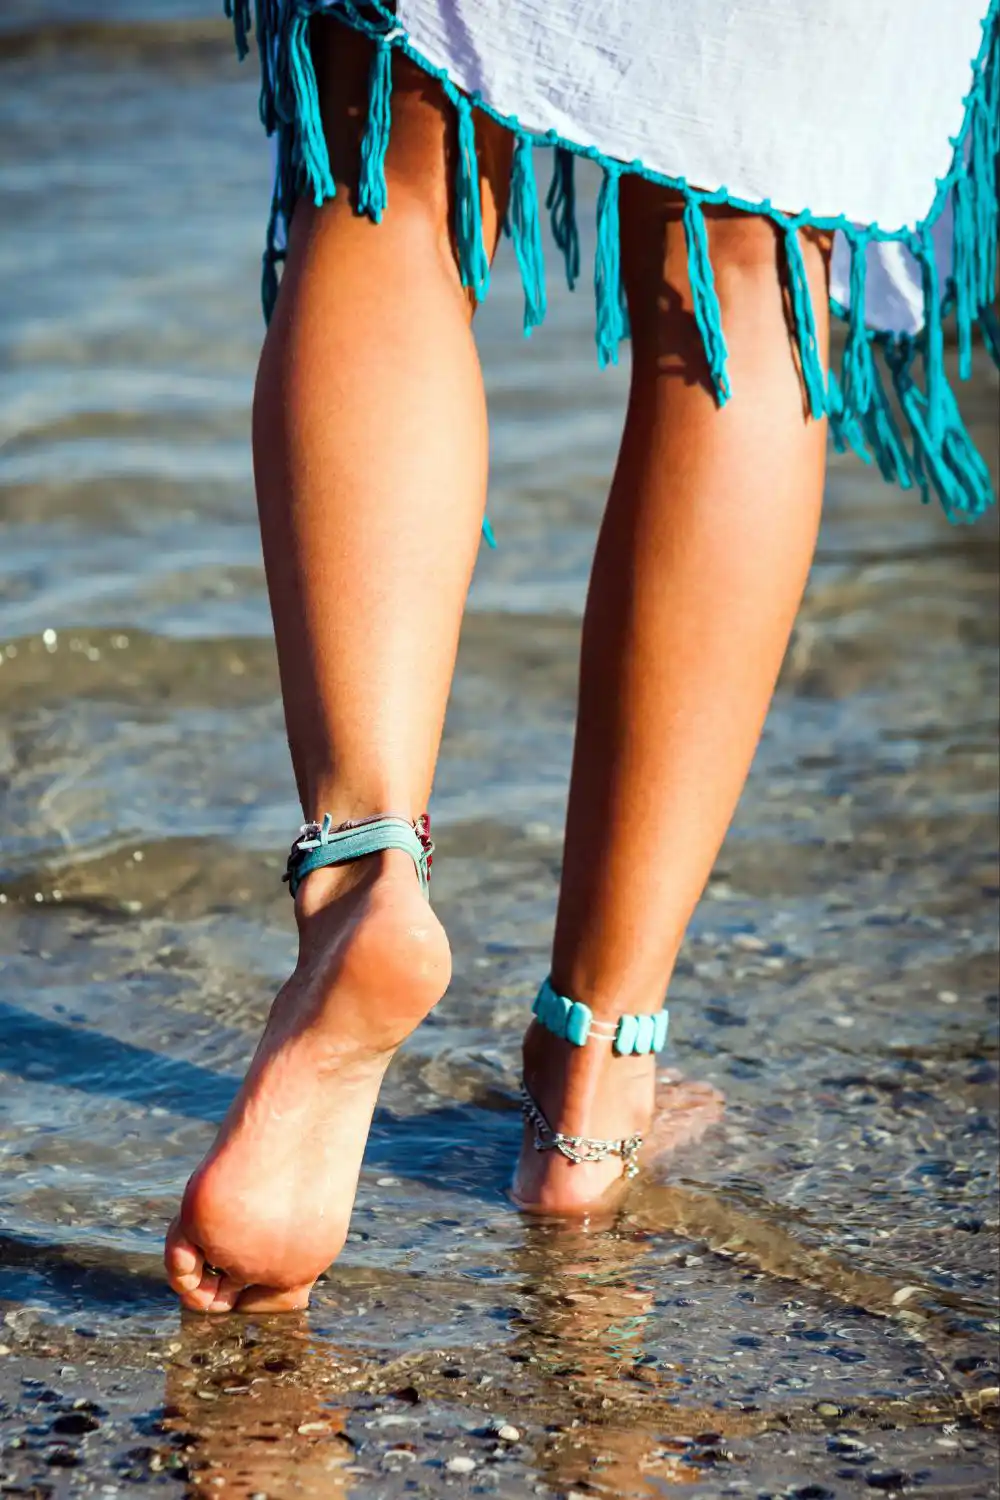 A female walking on the water wearing an anklet